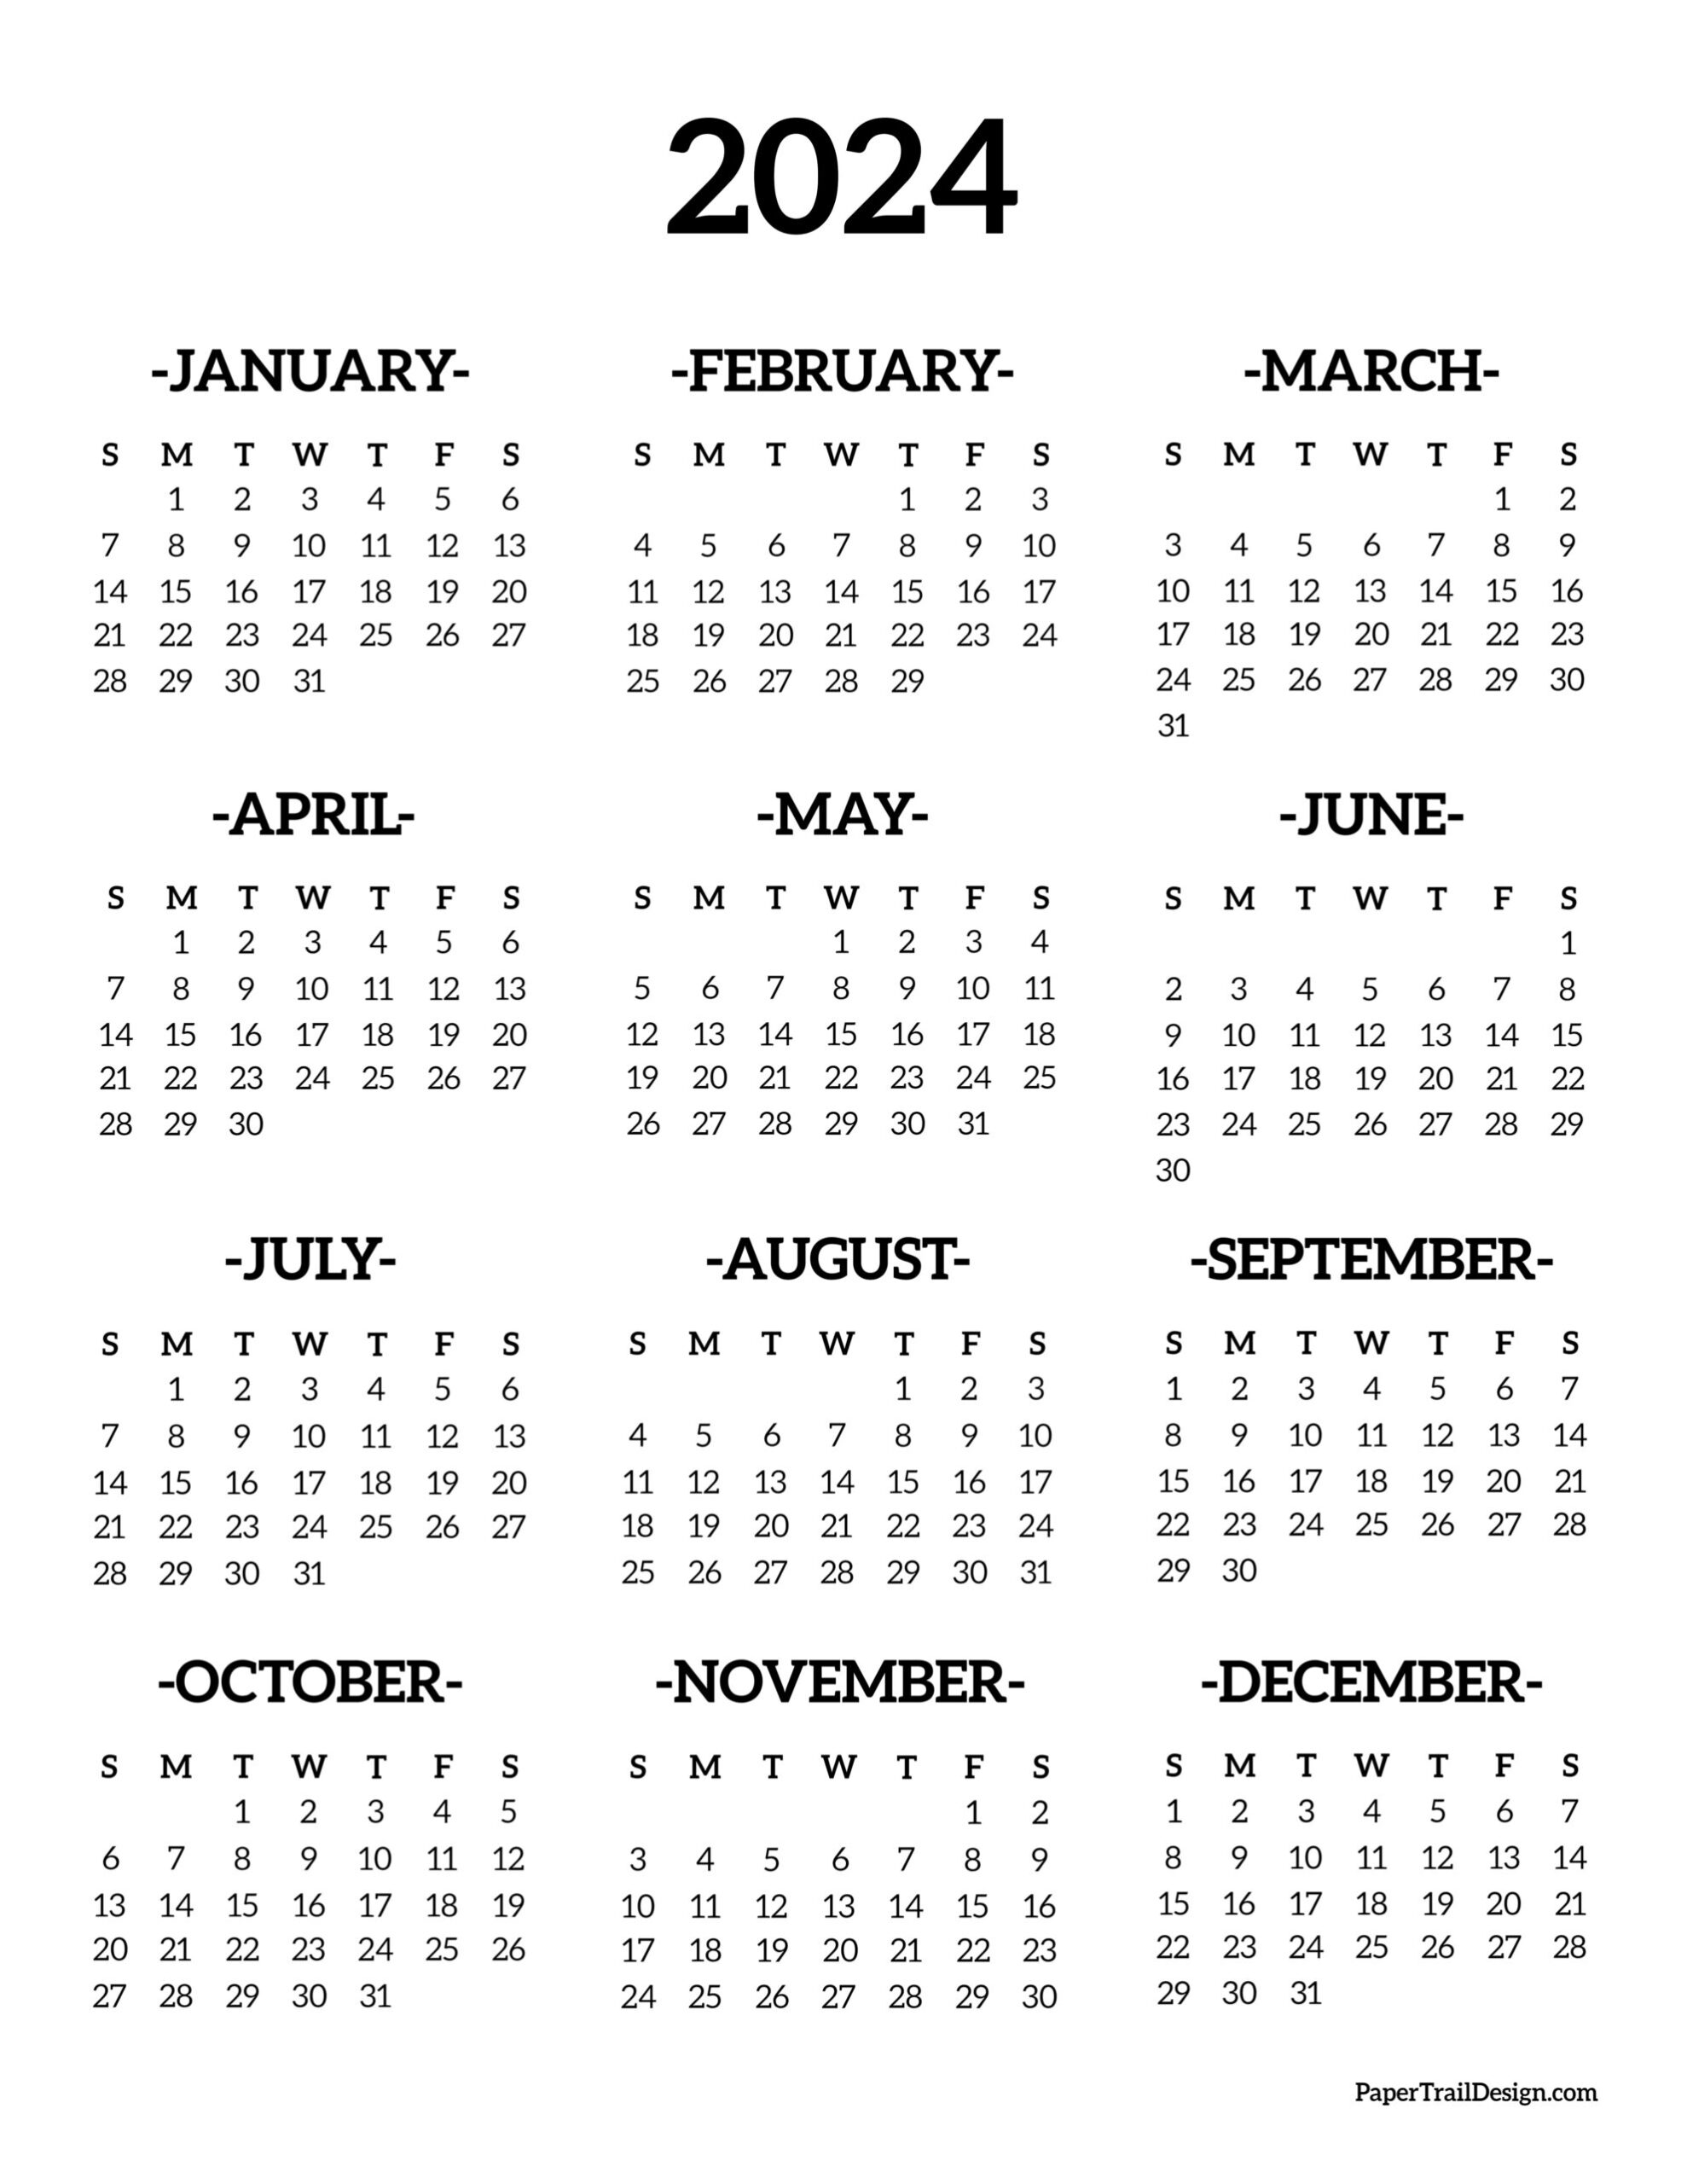 Calendar 2024 Printable One Page - Paper Trail Design for Free Printable Calendar Yearly 2024